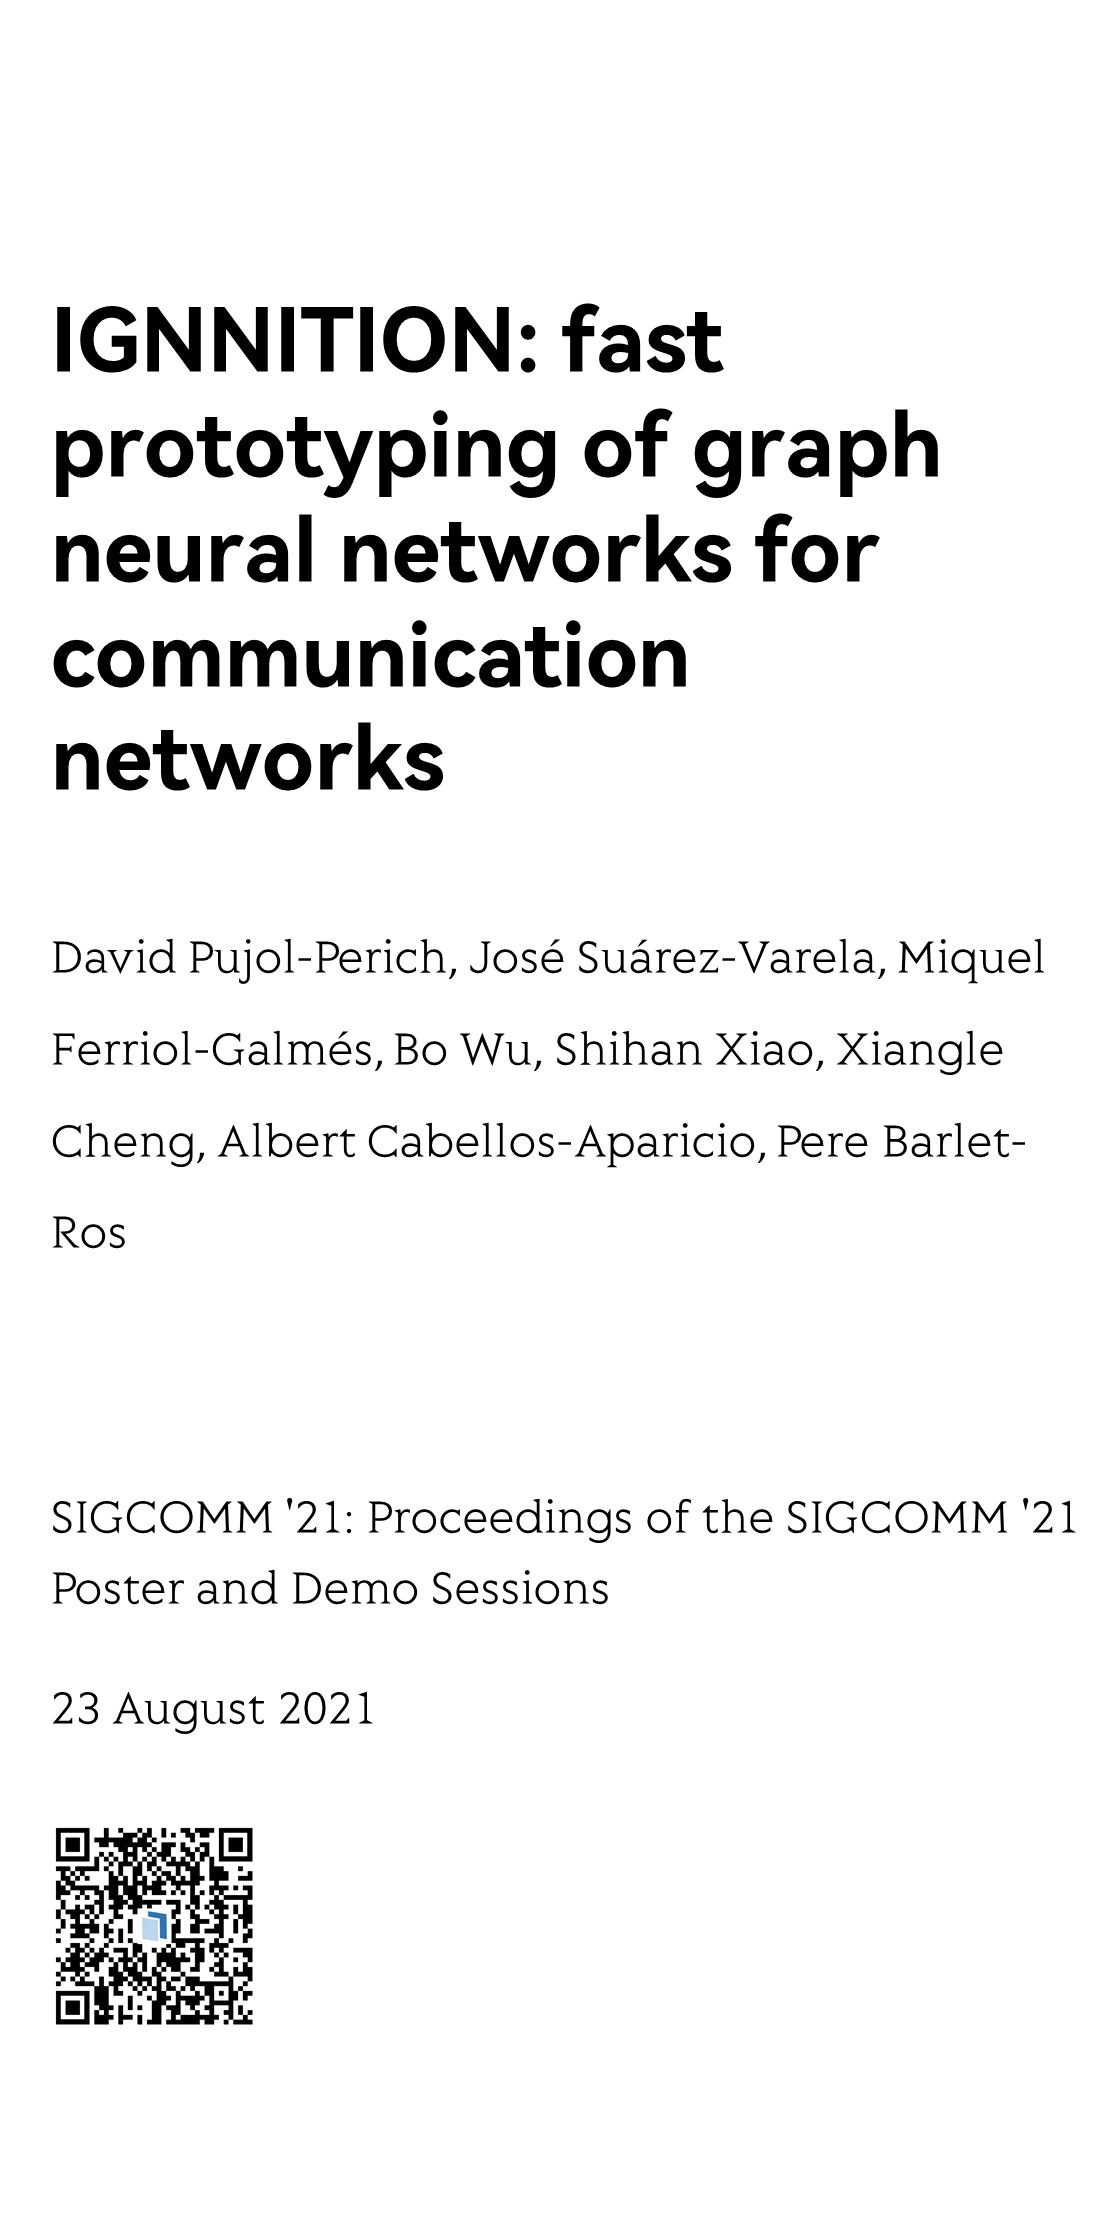 SIGCOMM '21: Proceedings of the SIGCOMM '21 Poster and Demo Sessions_1